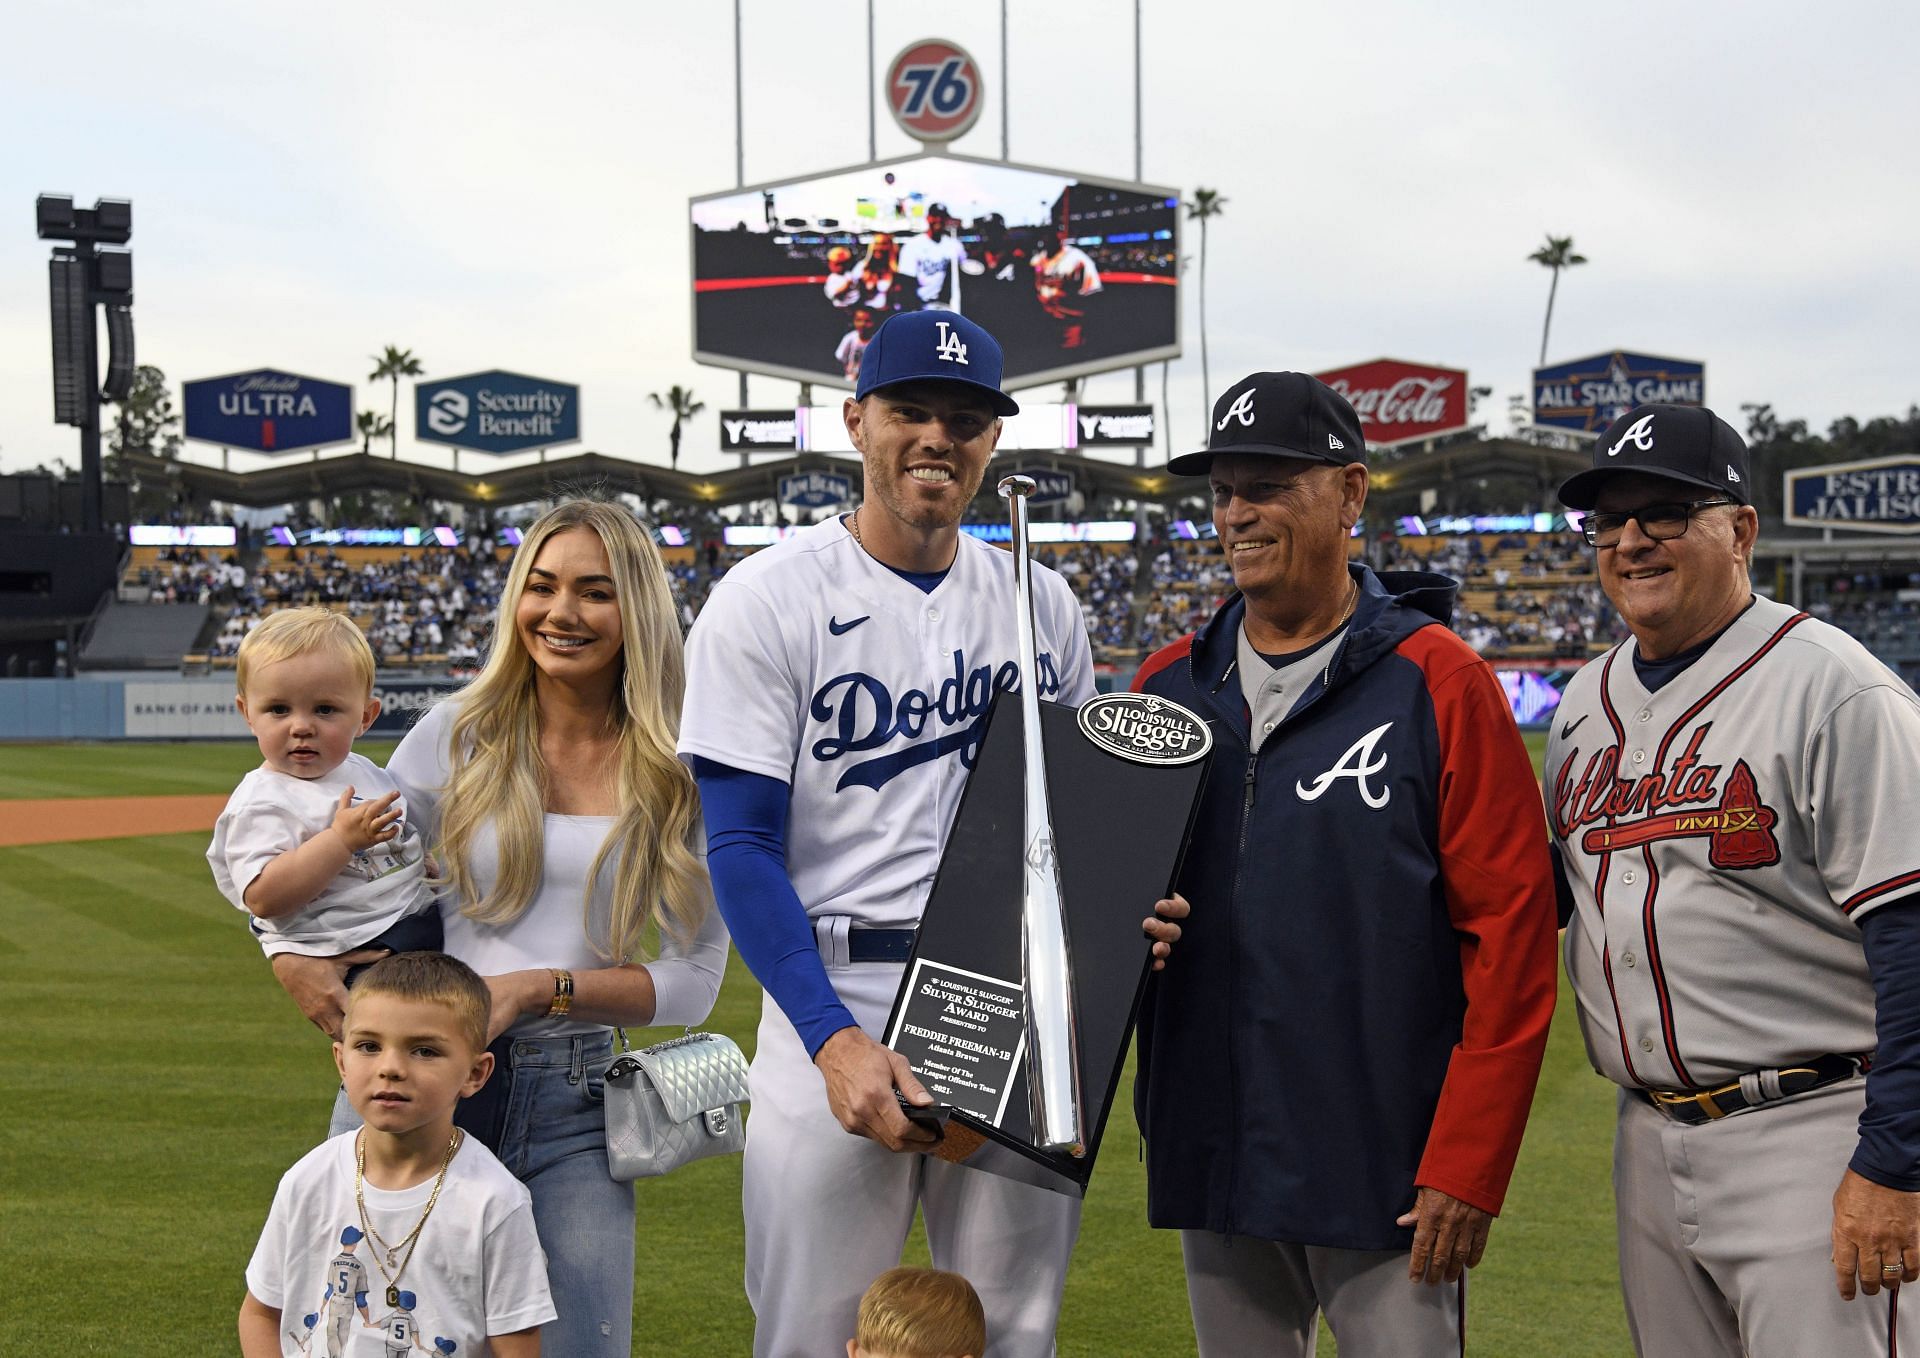 Freeman was awarded the National League Silver Slugger award last night before the game against his former team.